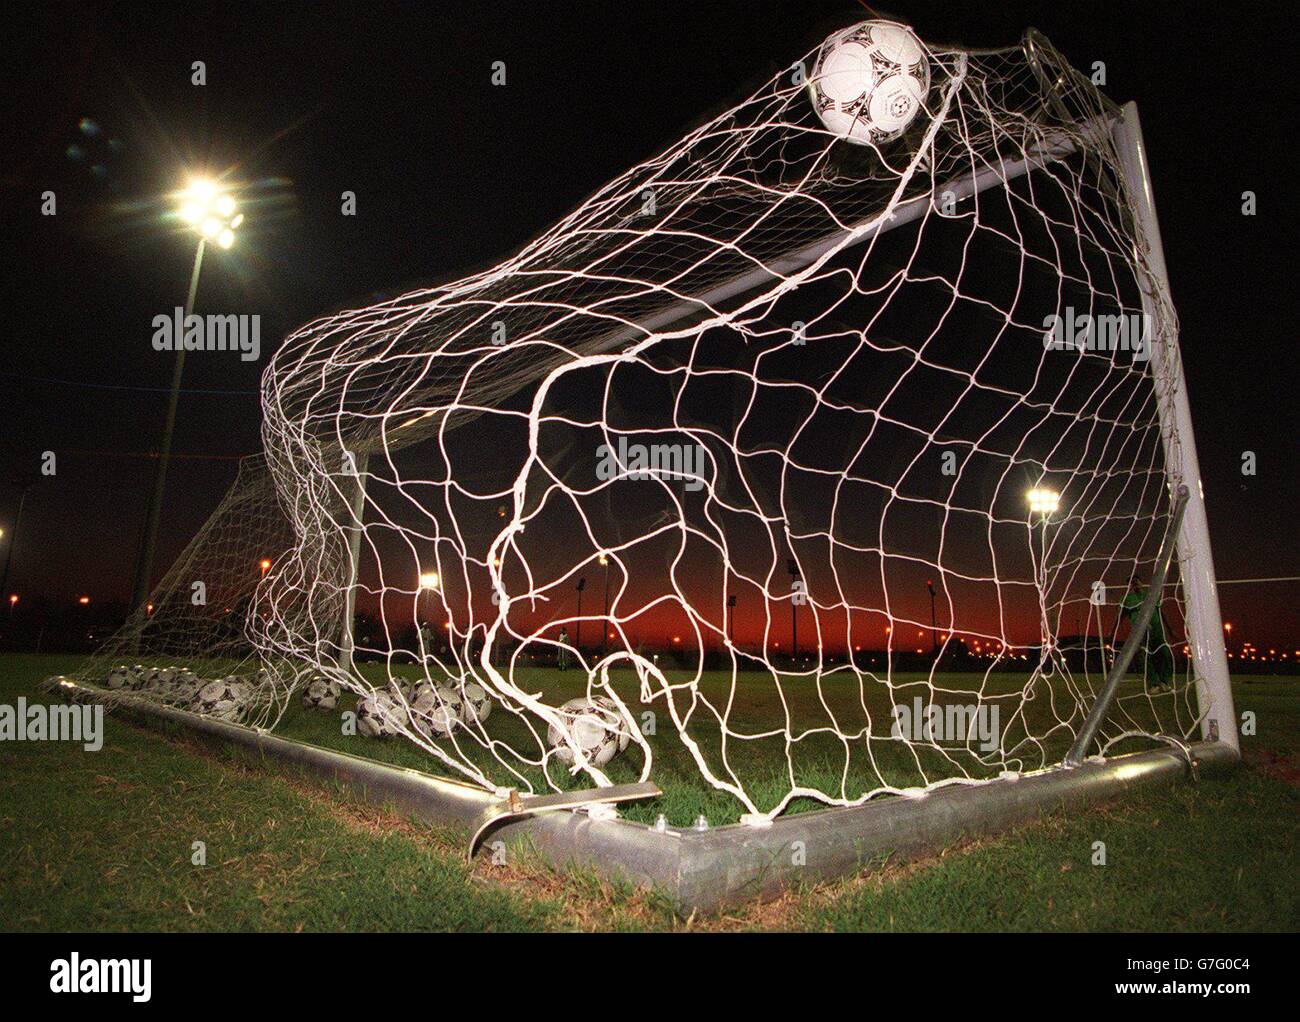 GOAL ! A Ball enters the net in a sunset in Abu Dhabi, United Arab Emirates at the Zayed Sports City training ground - Goalmouth and Adidas Tango Balls Stock Photo